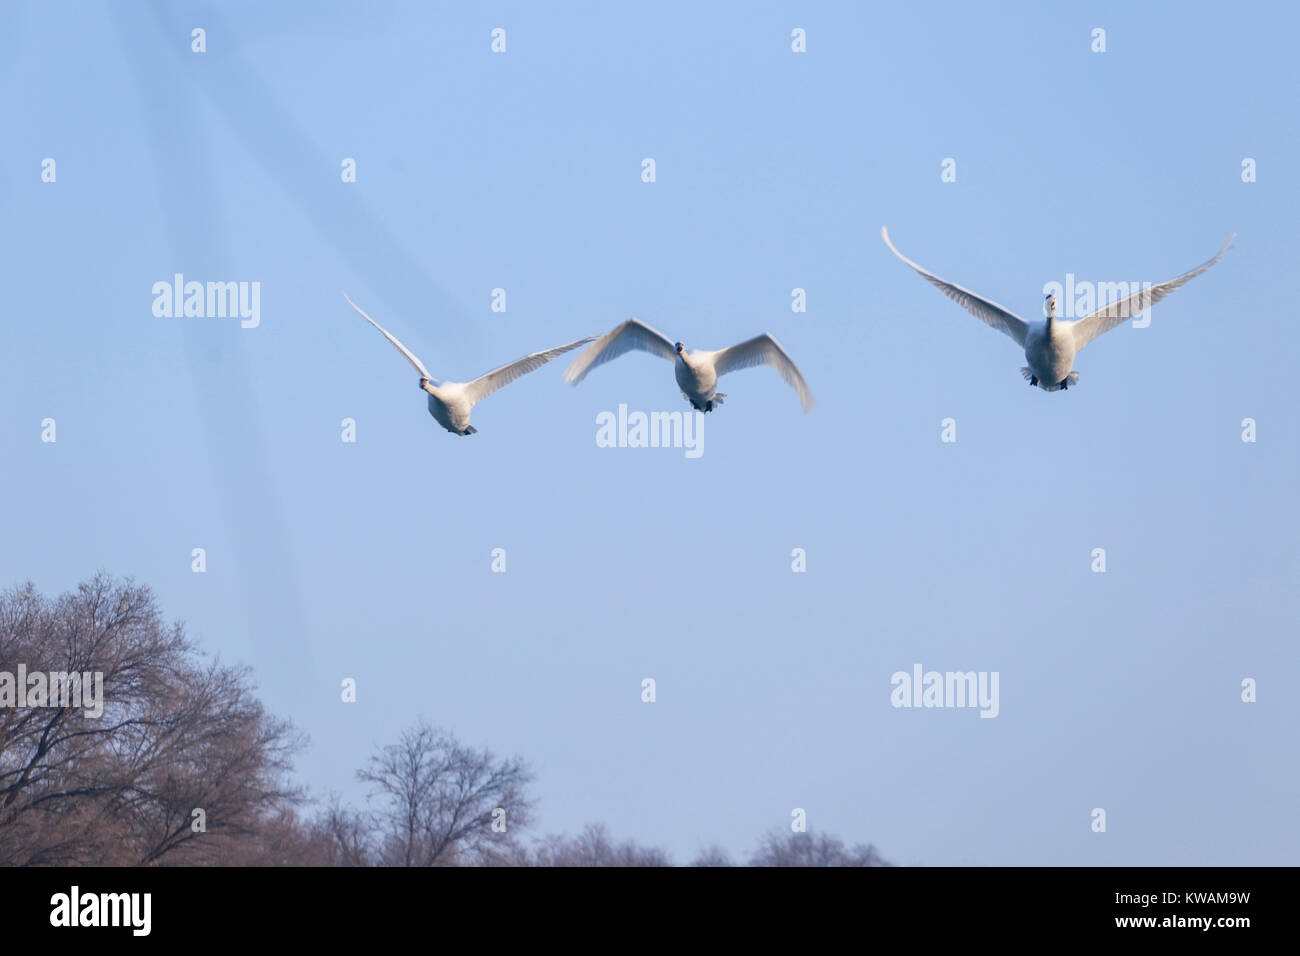 Urumqi, China's Xinjiang Uygur Autonomous Region. 31st Dec, 2017. Swans fly over the Swan Lake of Ili River Valley in Yining County, northwest China's Xinjiang Uygur Autonomous Region, Dec. 31, 2017. Thanks to the effective environmental protection measures of the local govenment, every year many swans spend the winter here. Credit: Xu Wen/Xinhua/Alamy Live News Stock Photo